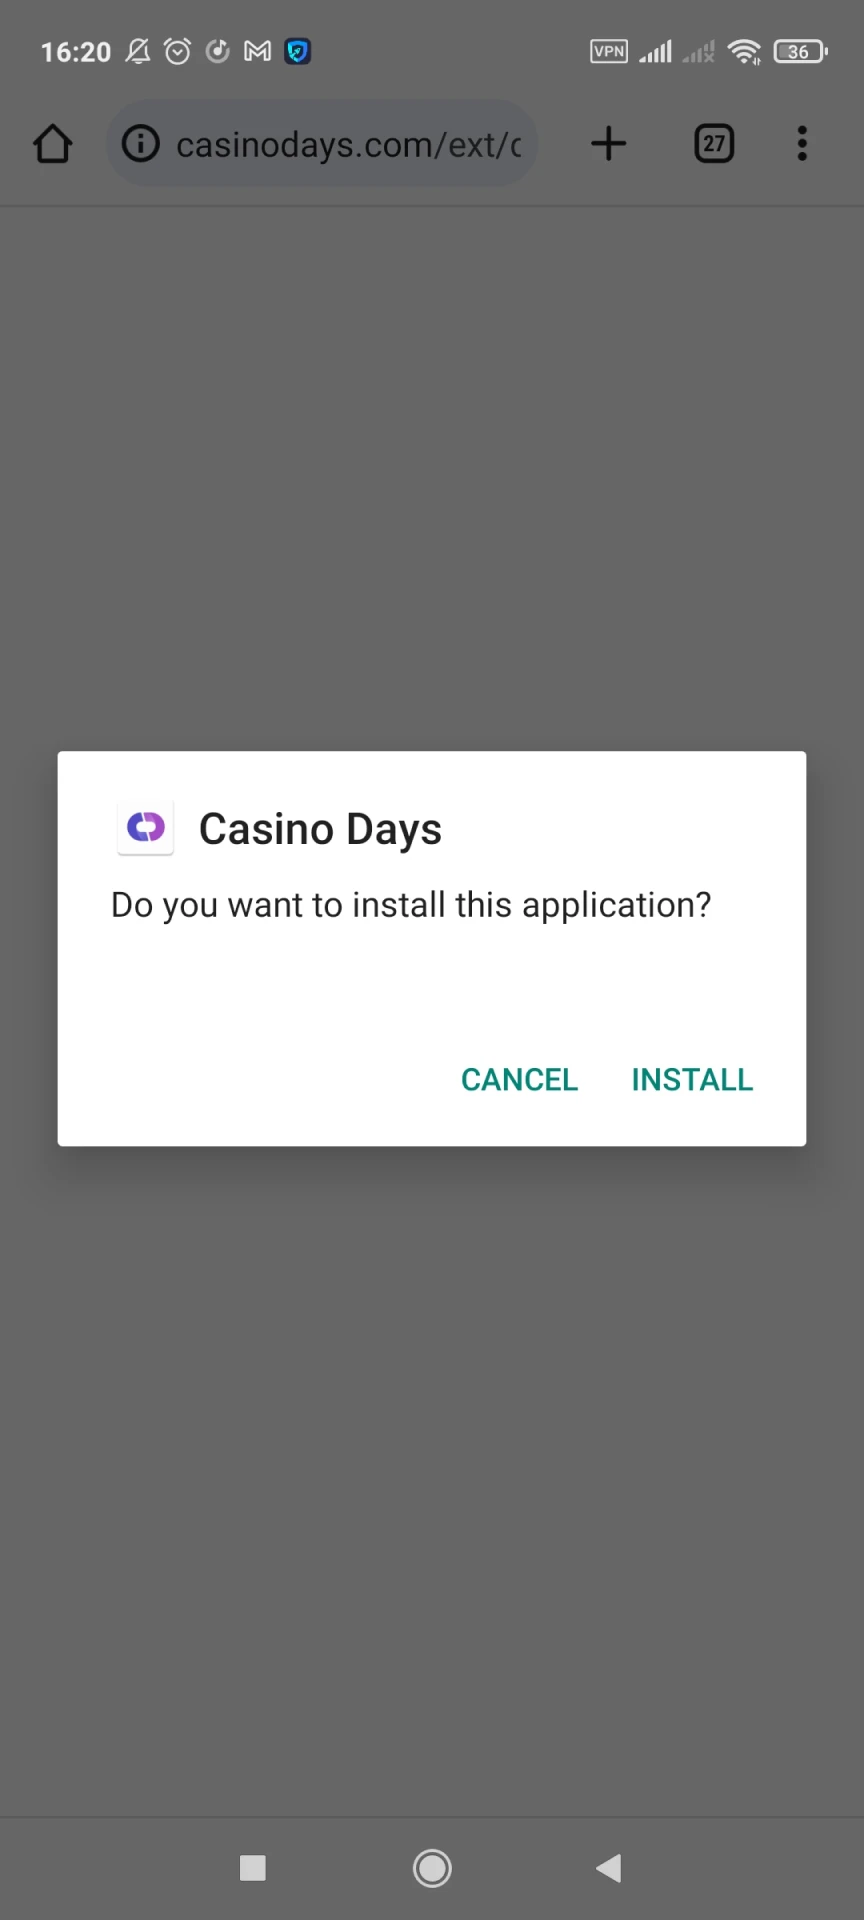 Install the Casino Days application for Android.